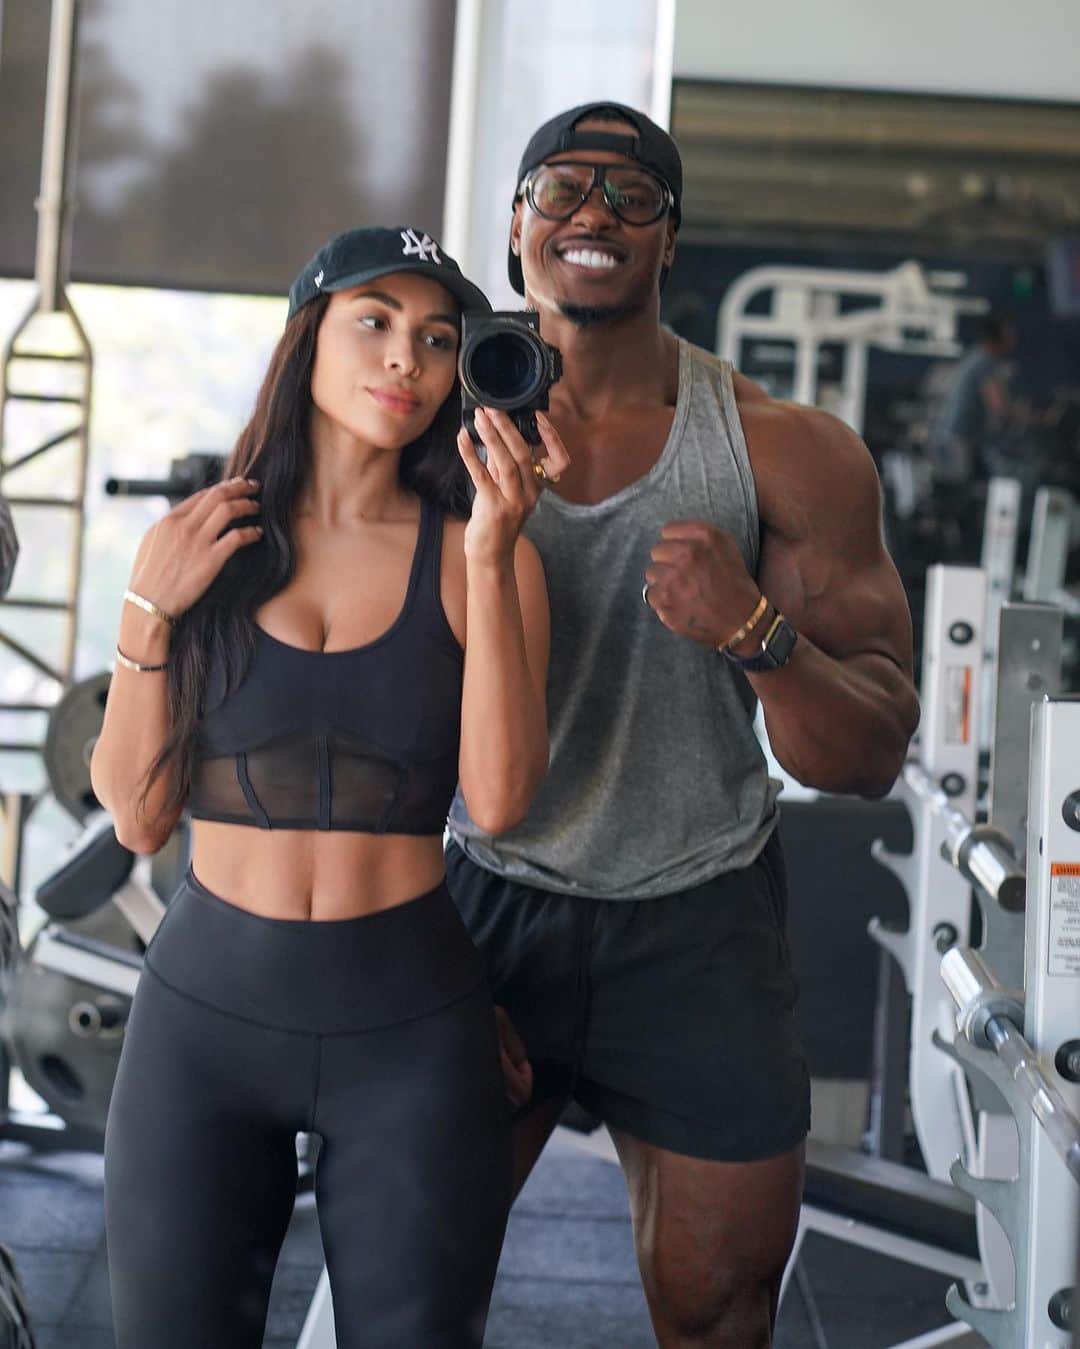 Simeon Pandaのインスタグラム：「Where the gym couples at? ❤️💪❤️ Tag your partner if you both put in work at the gym 😤」